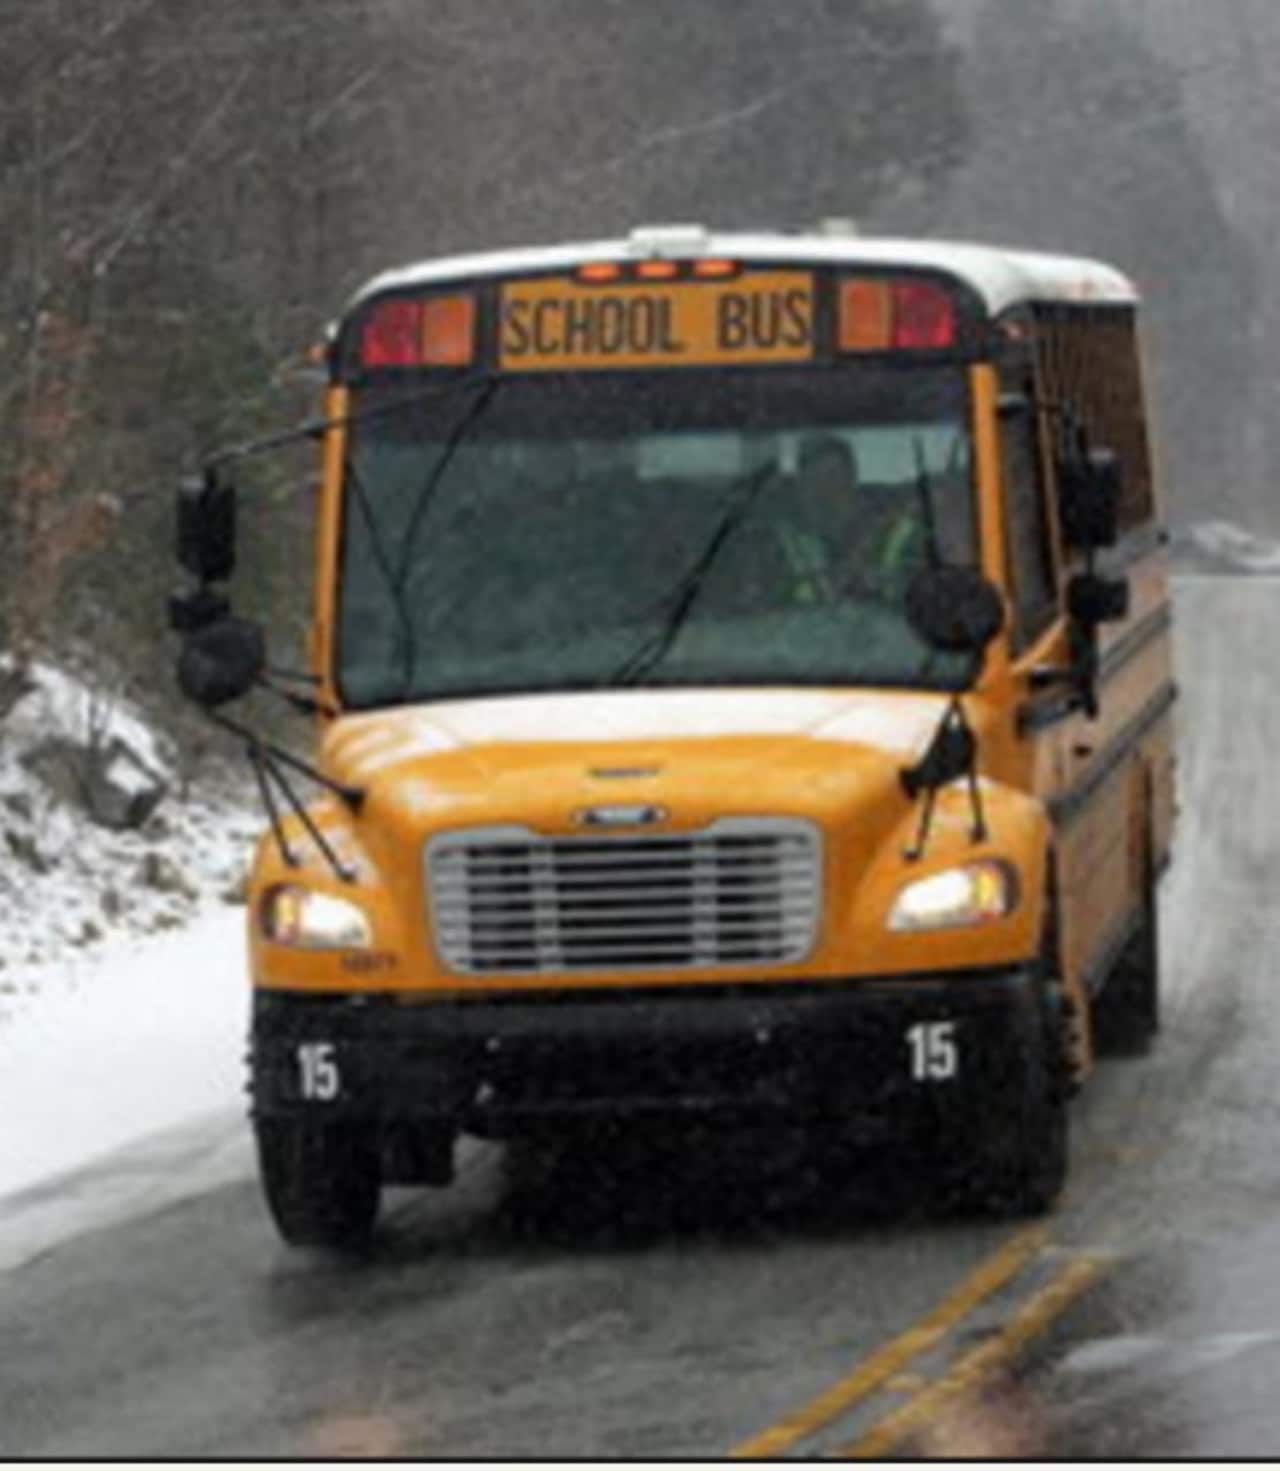 Newtown schools will close early Tuesday due to weather.